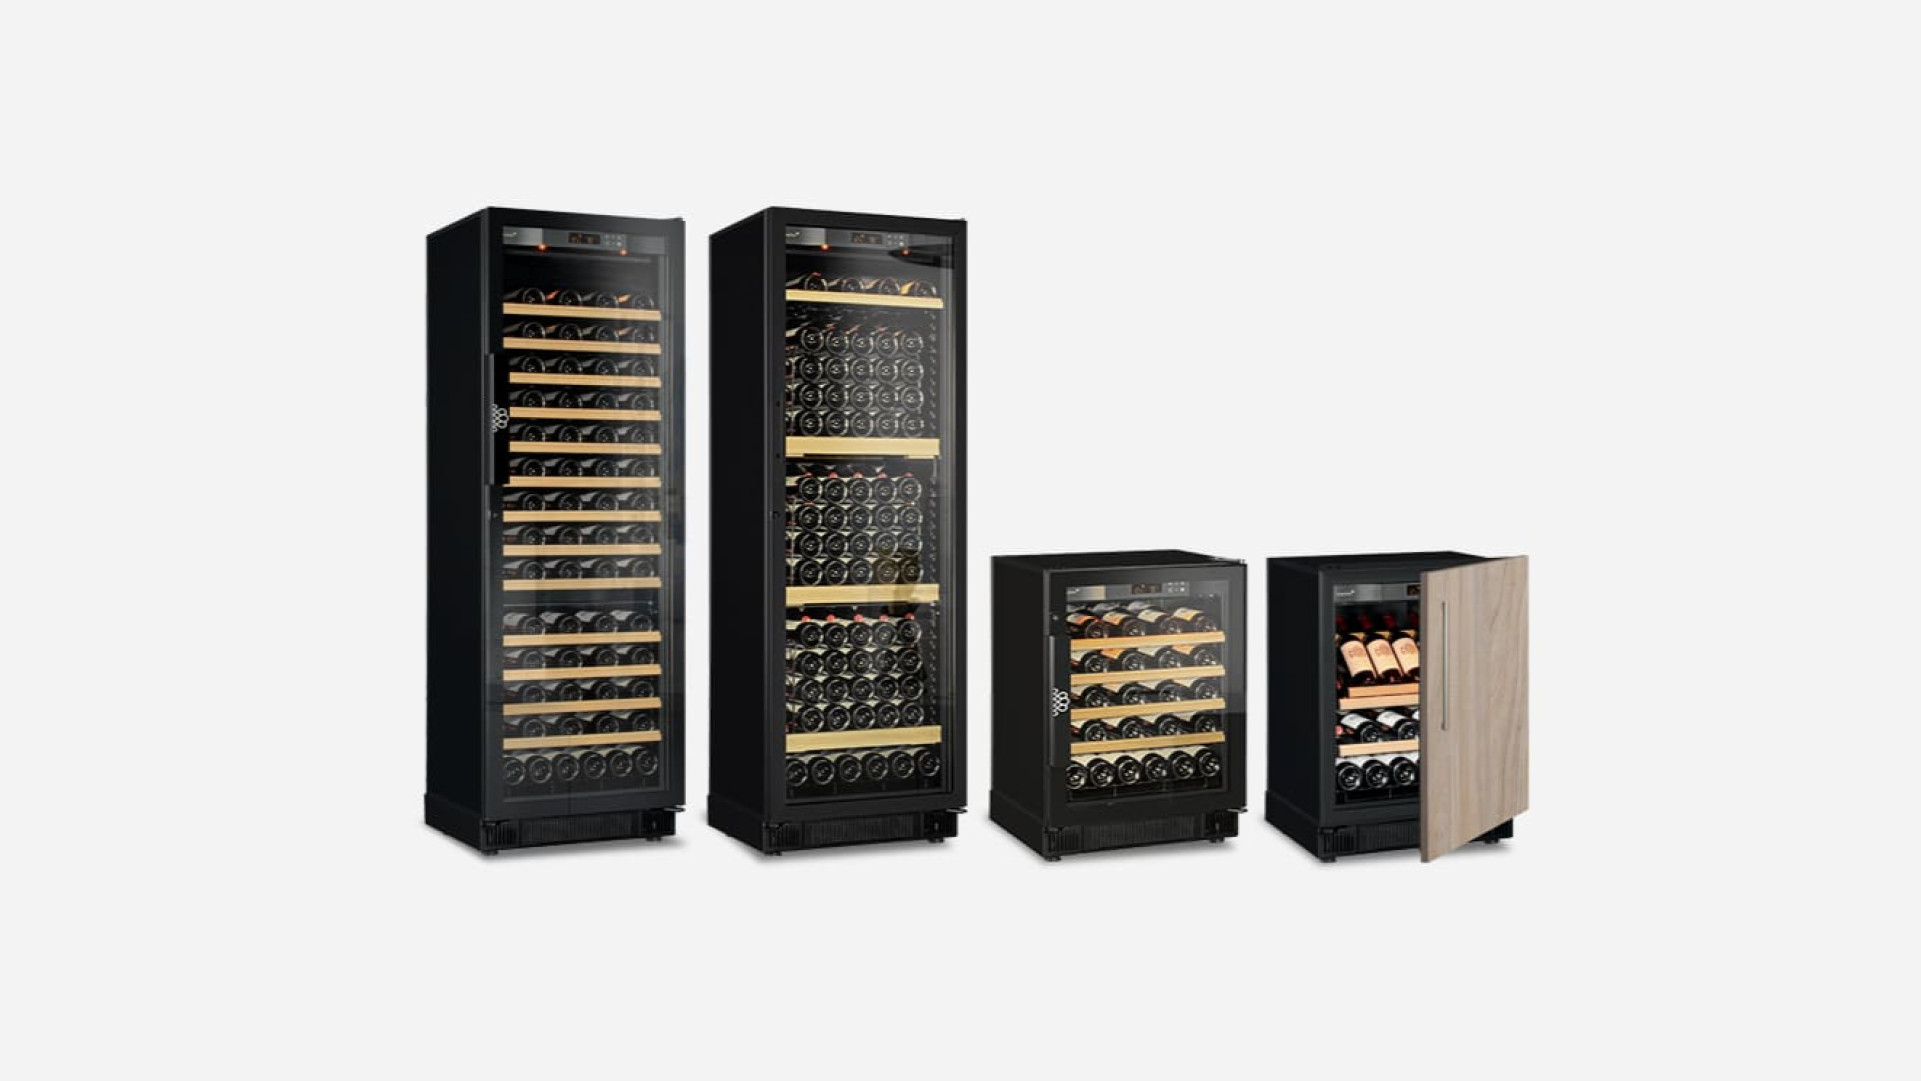 Range of compact built-in wine cabinets, small and large, service cooler or aging cabinet, choice of door: glazed or technical opaque. Compact EuroCave